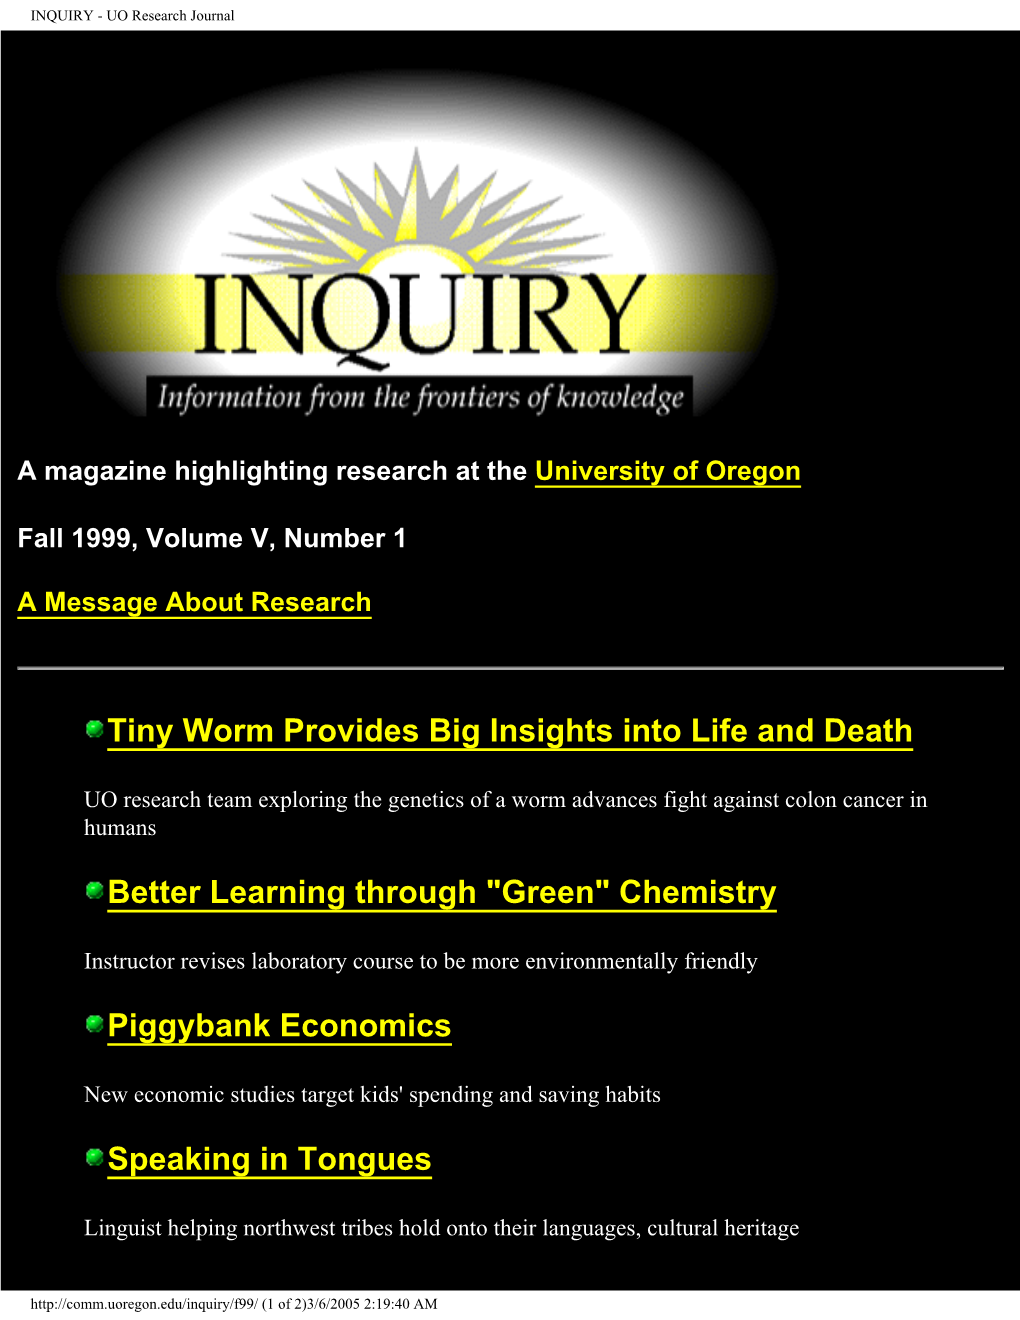 INQUIRY - UO Research Journal